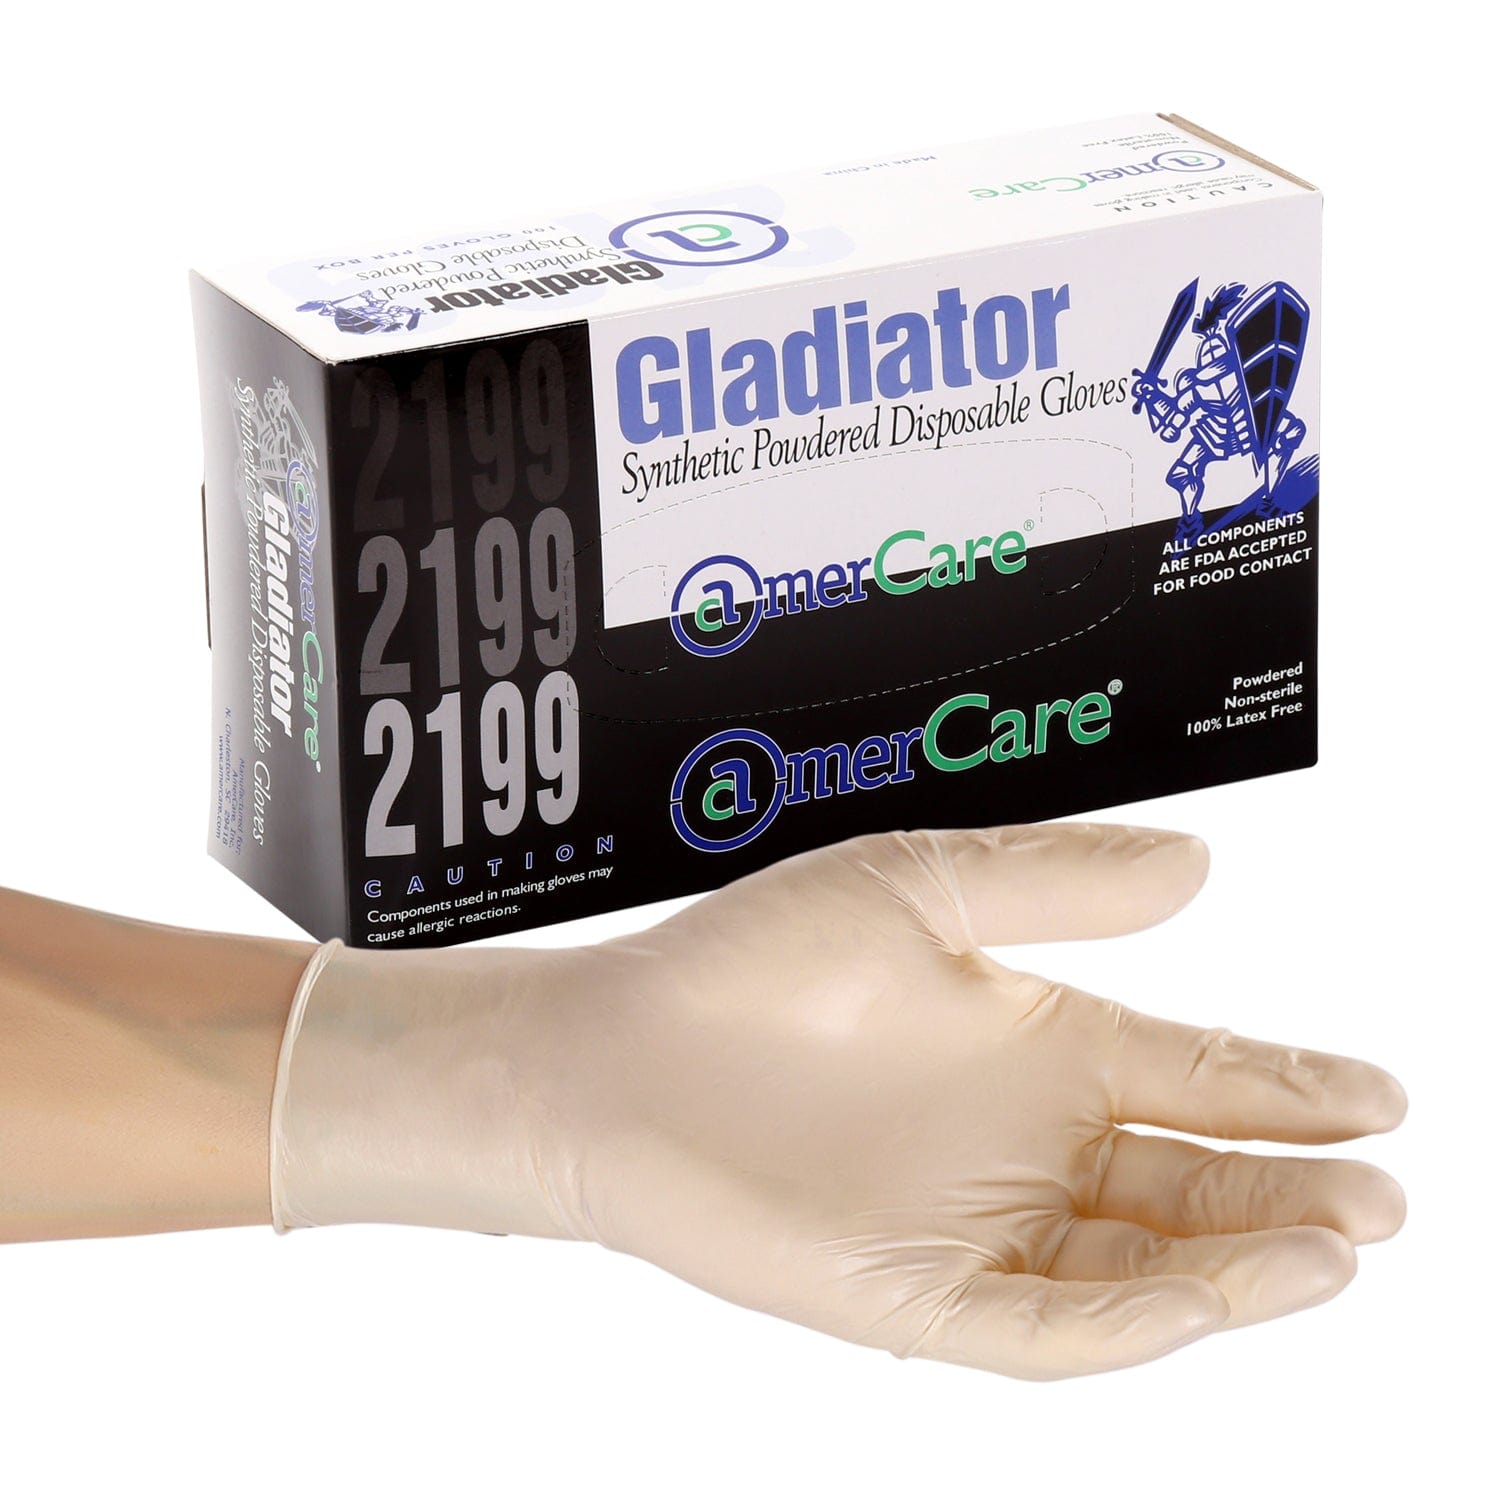 Synthetic Gladiator Gloves